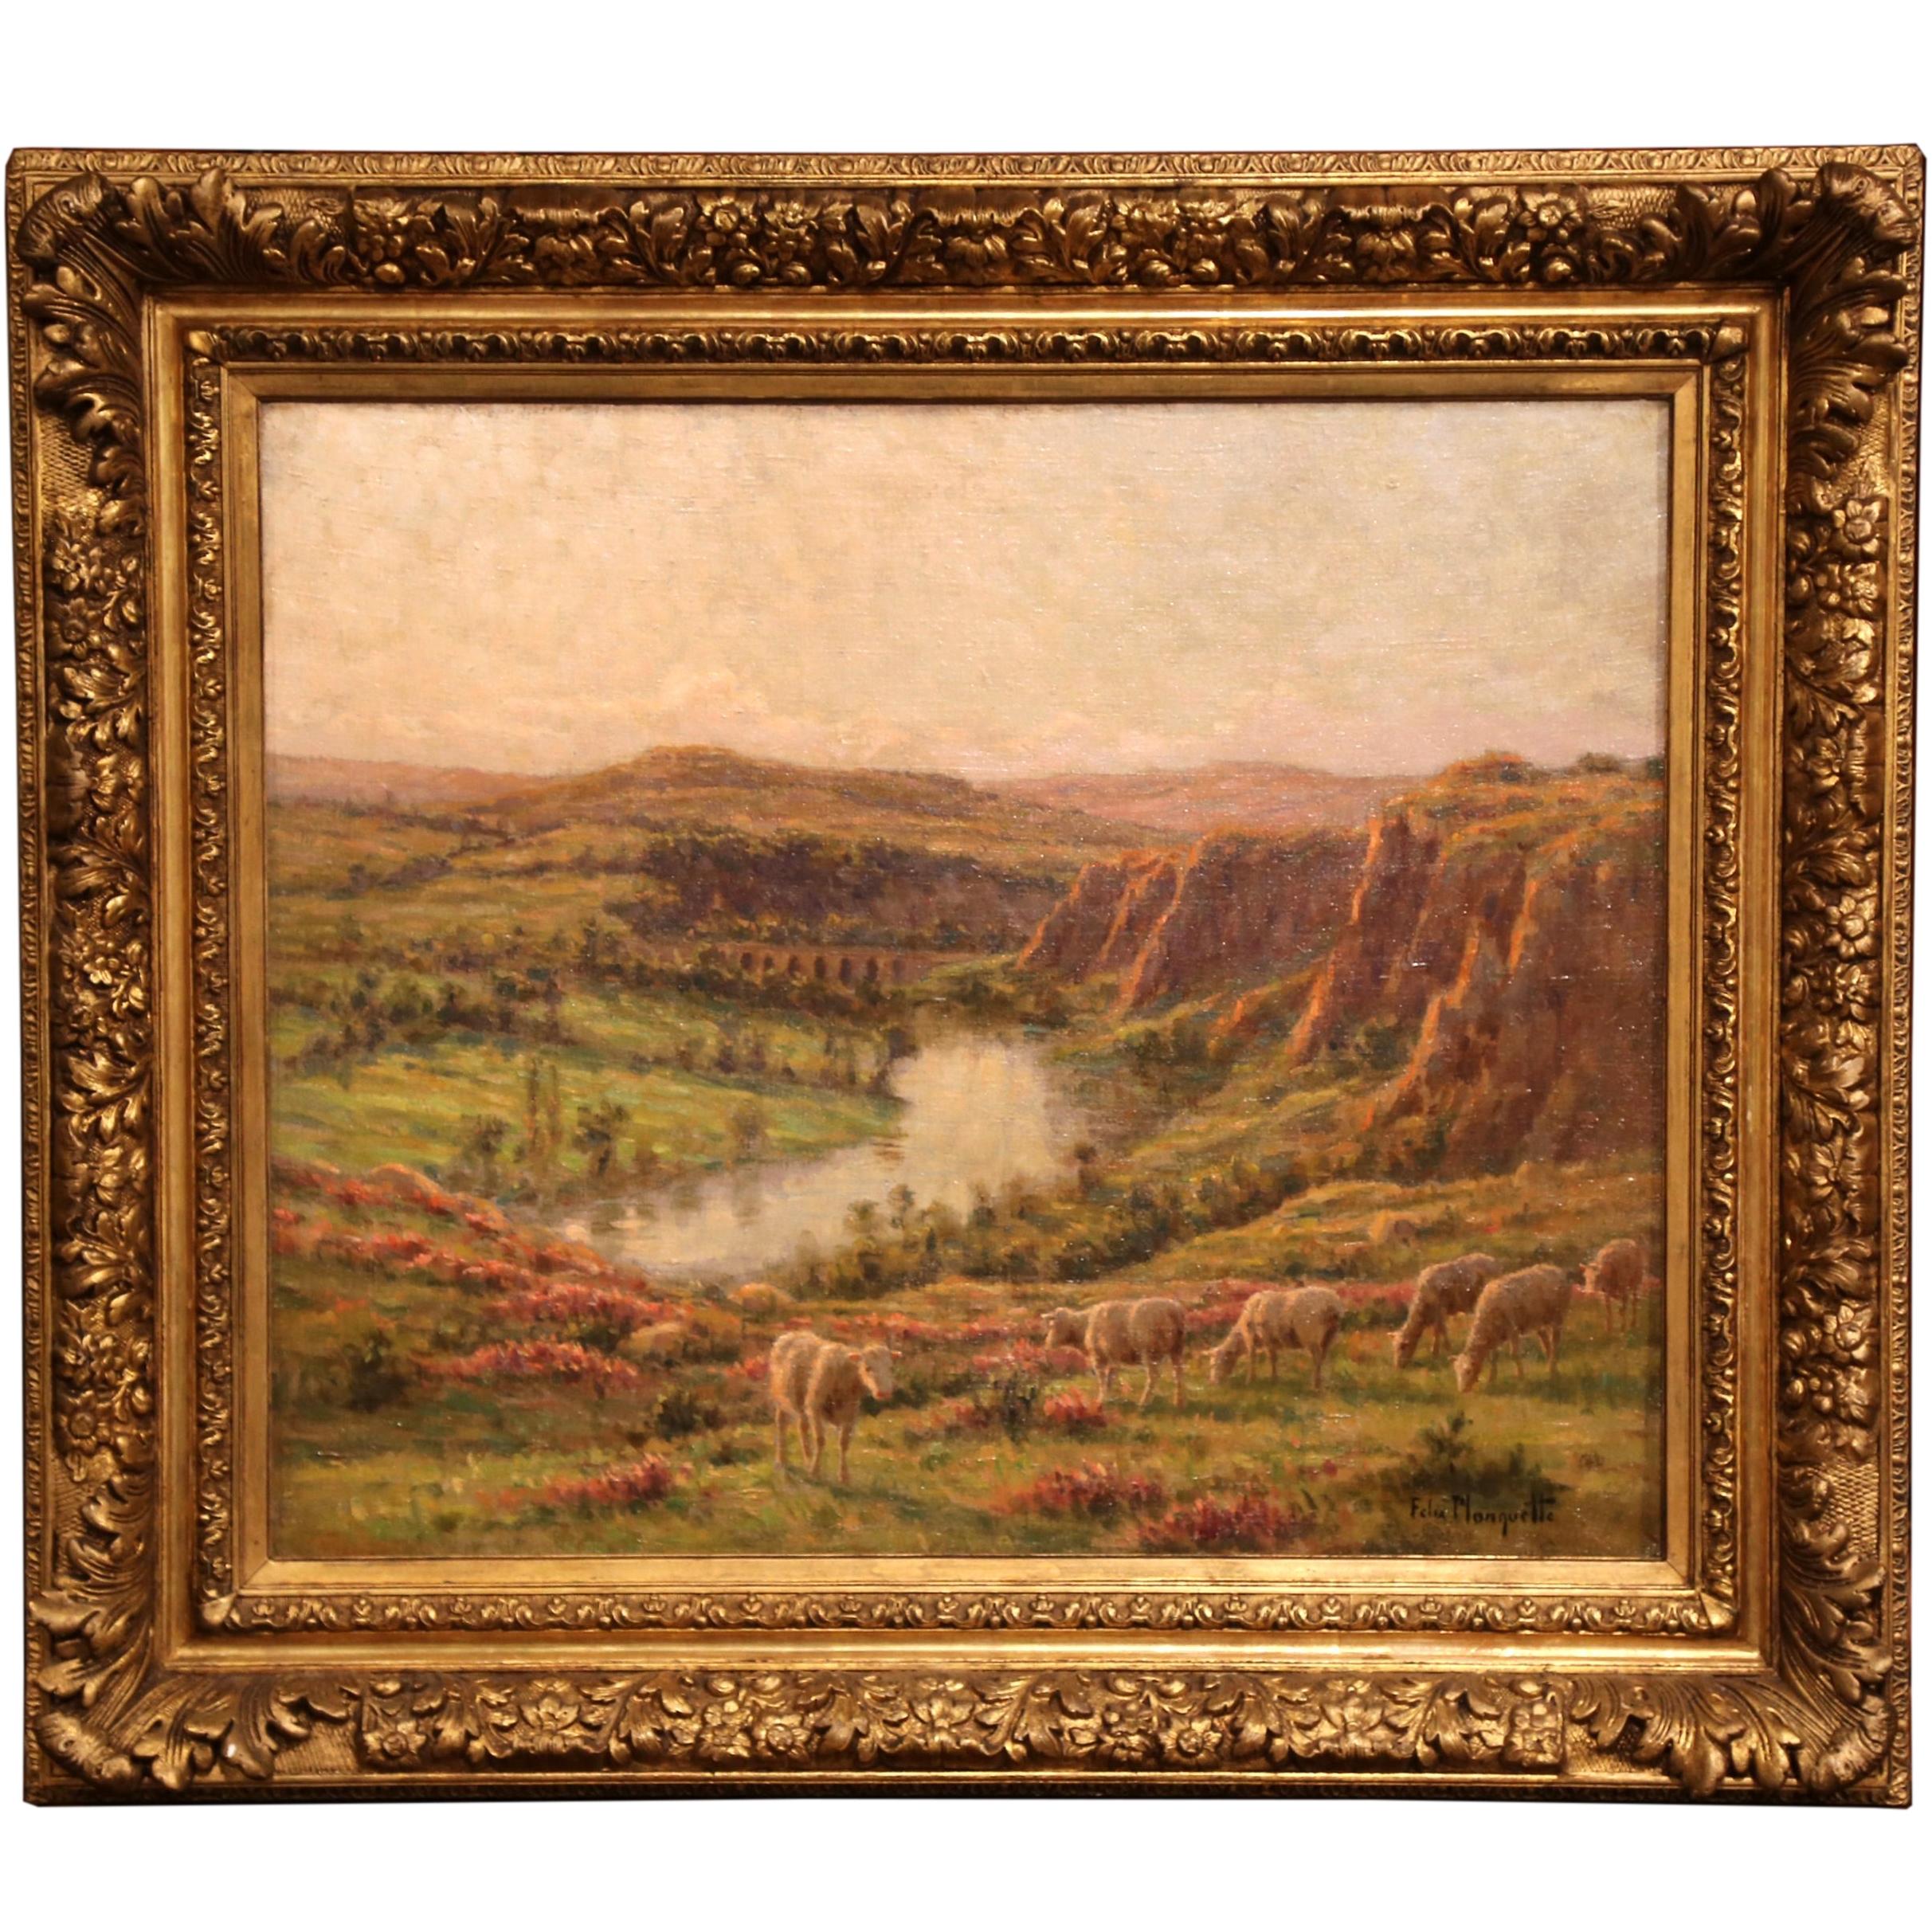 This oil on canvas painting depicts a peaceful pastoral scene. The composition shows a herd of sheep grazing in the foreground and surrounded a landscape with rolling, picturesque hills and pond in the background. The painting is set inside its